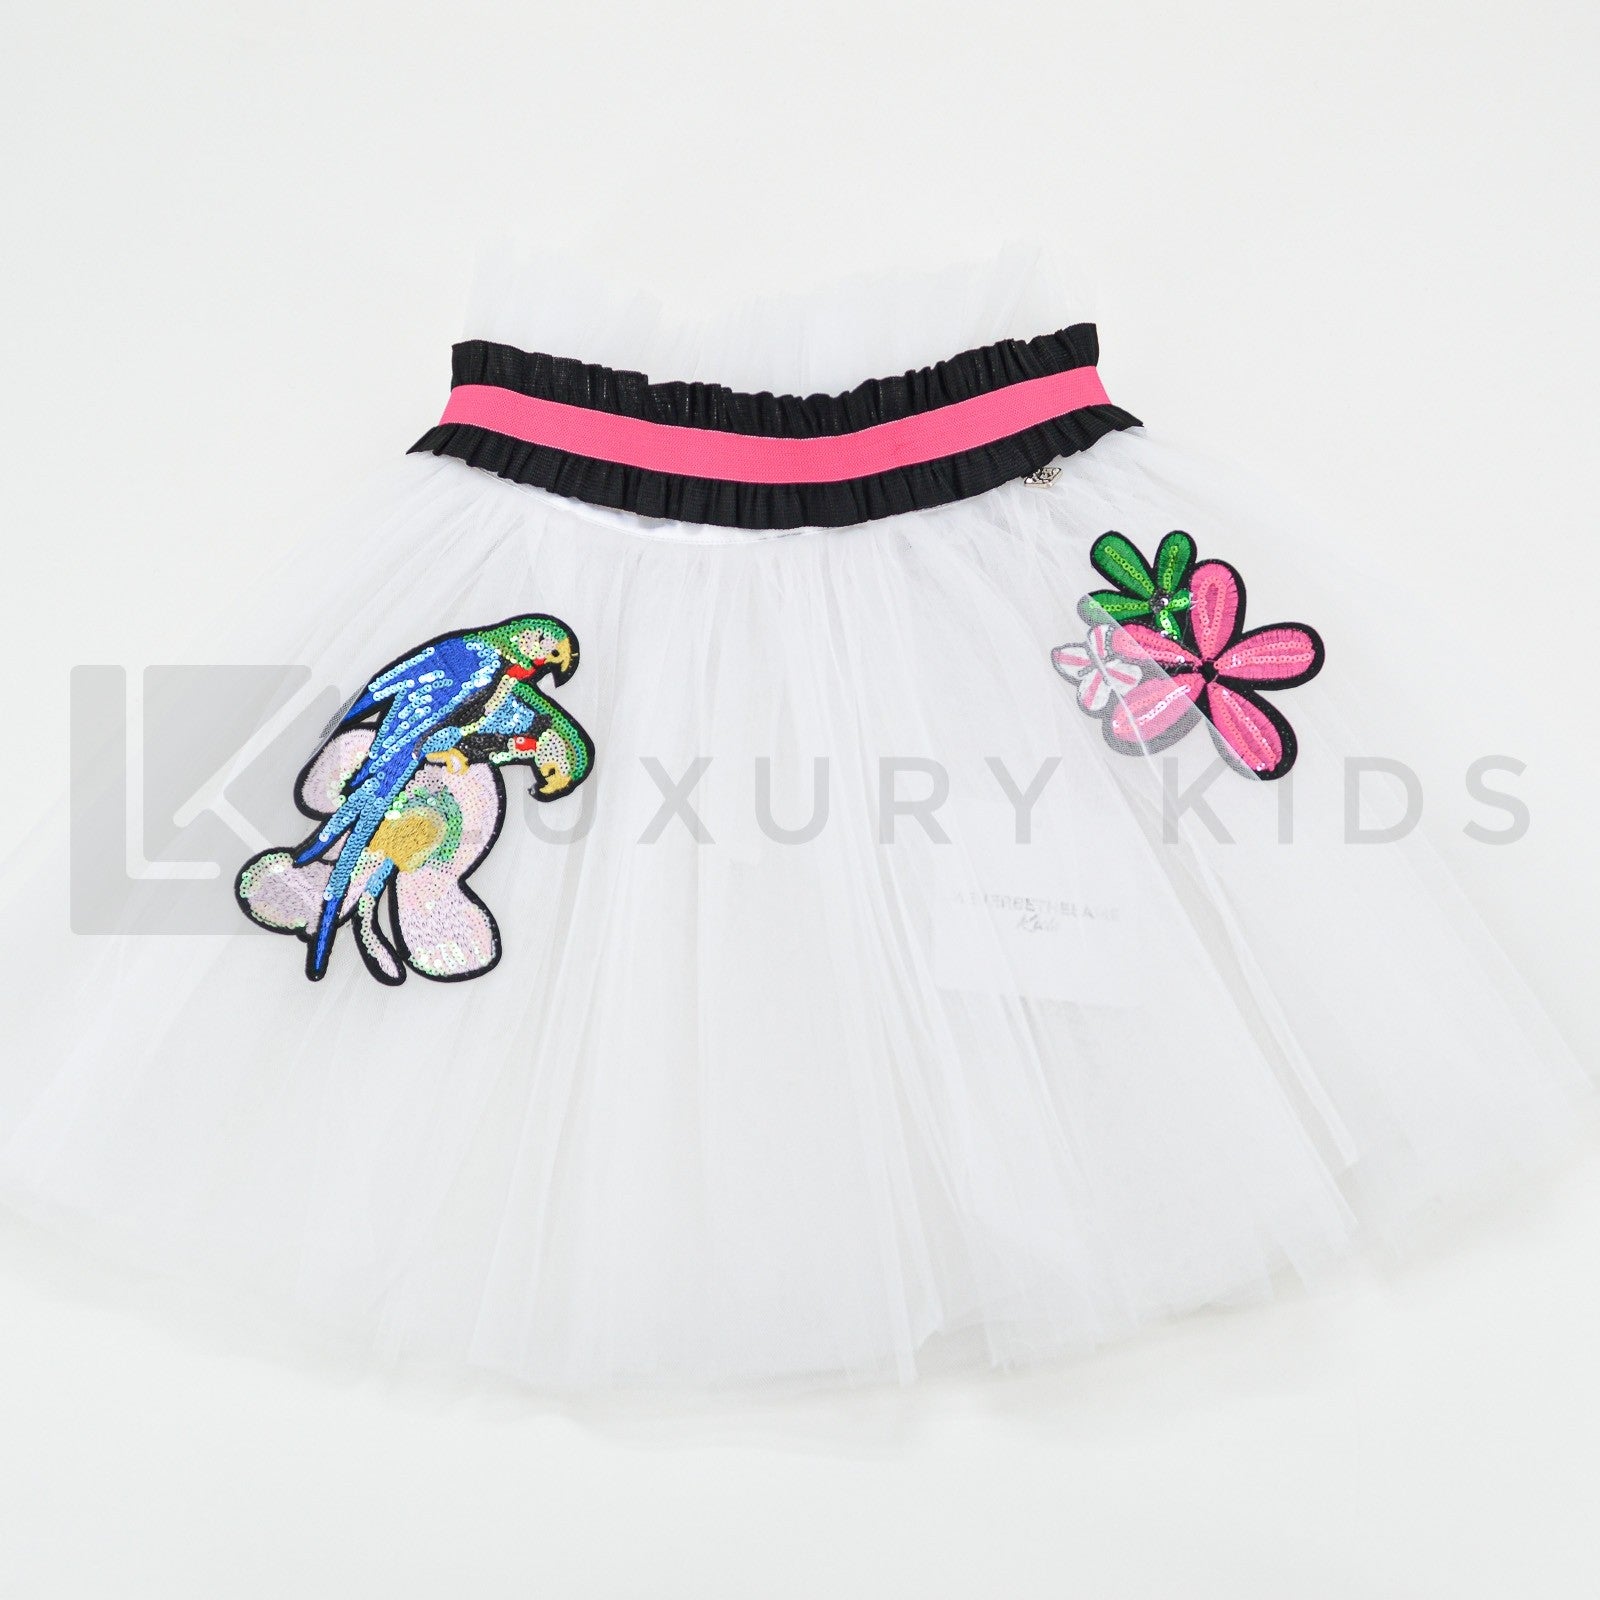 Gonna In Tulle Bianca Con Culotte Bambina NBTS 3200 - NBTS - LuxuryKids